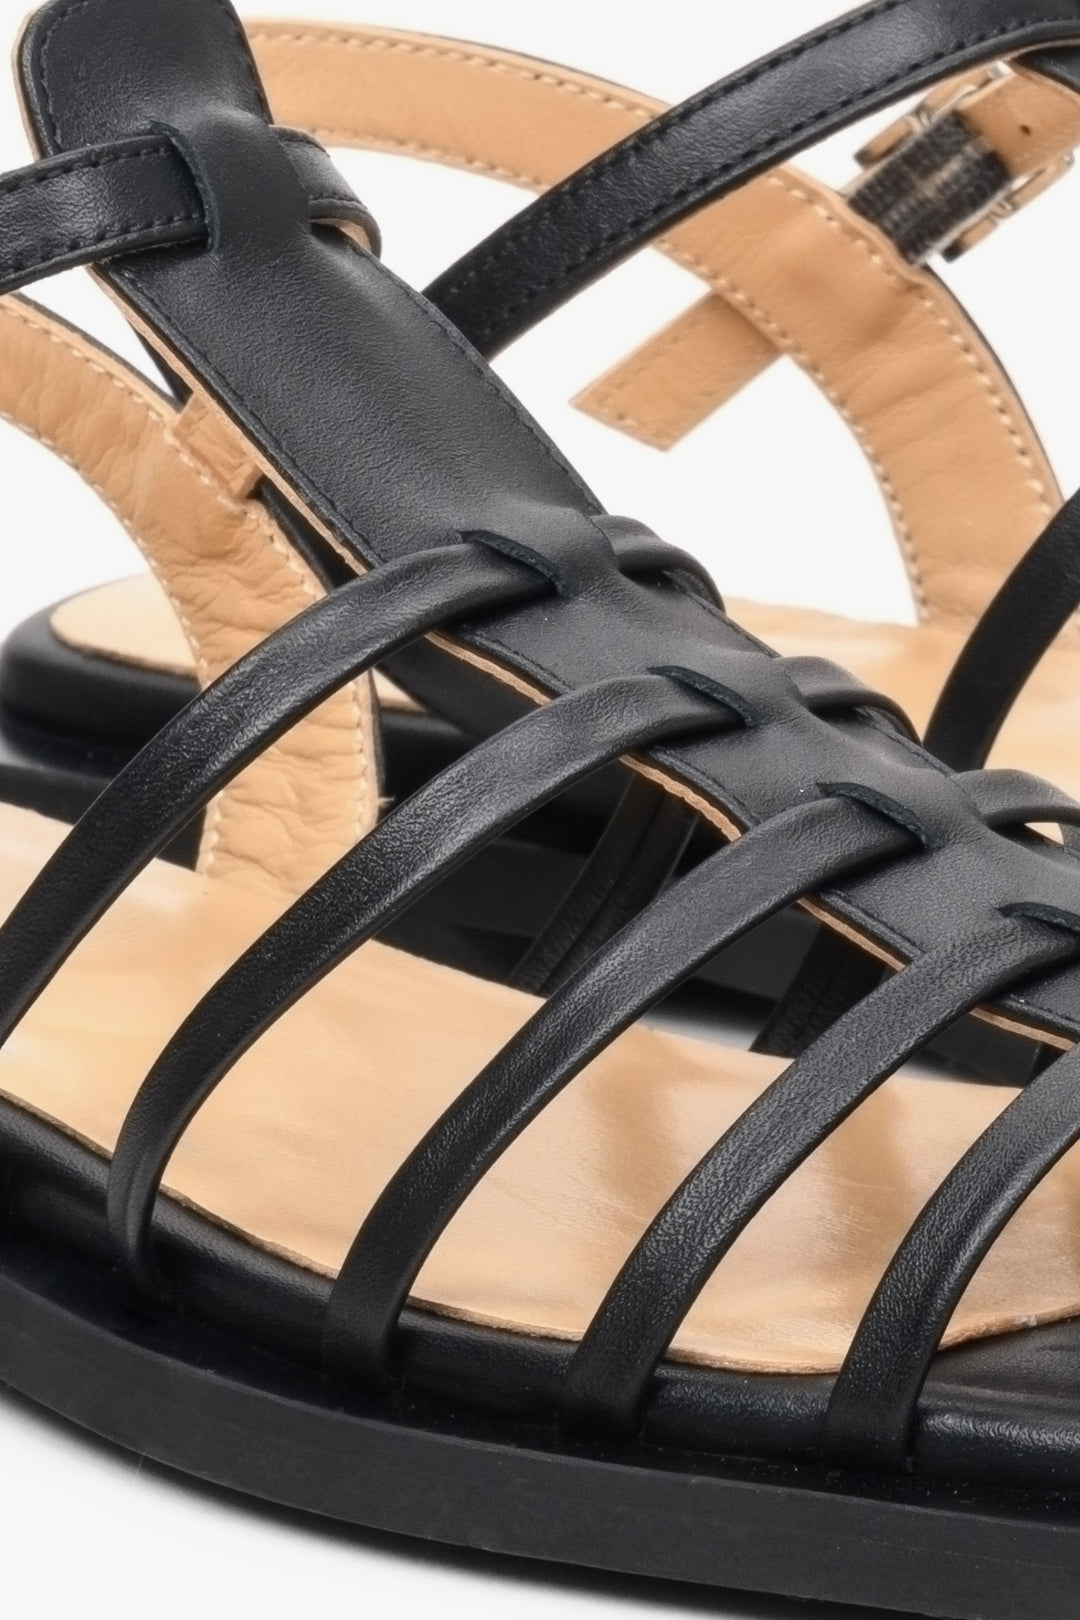 Women's sandals for summer in black natural leather - close-up on details.